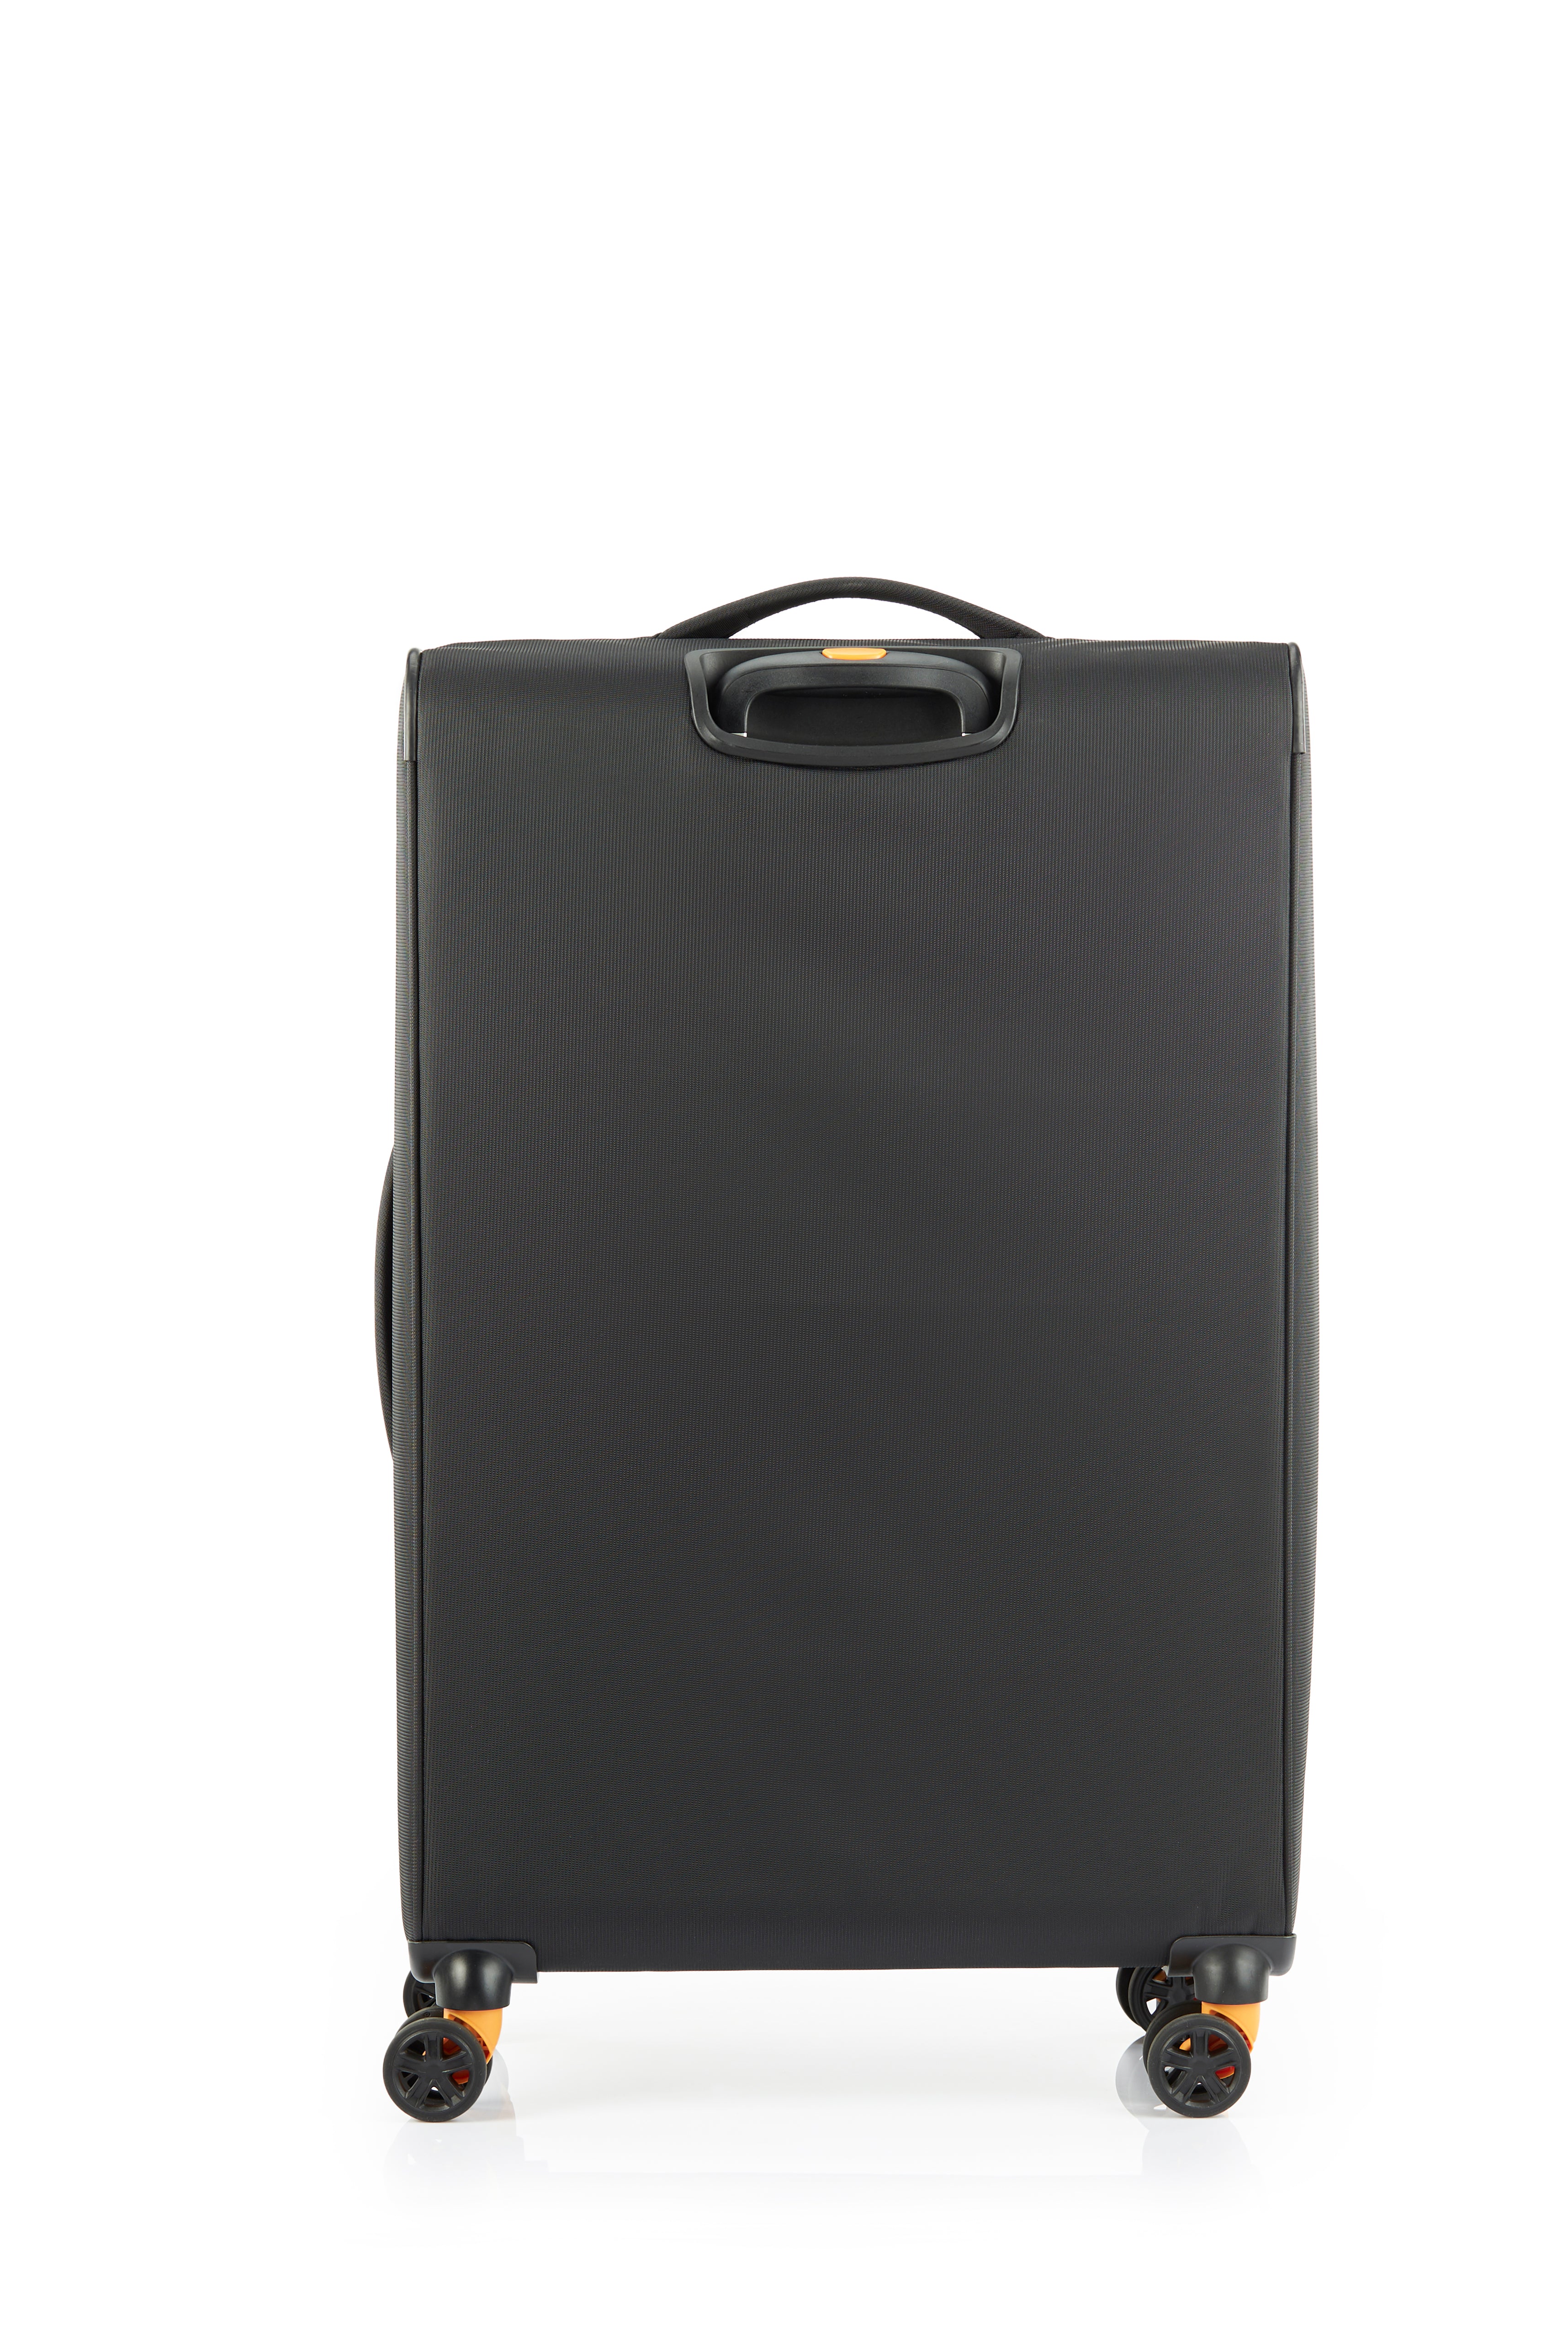 American Tourister - Applite ECO 82cm Large Suitcase - Black/Must-5